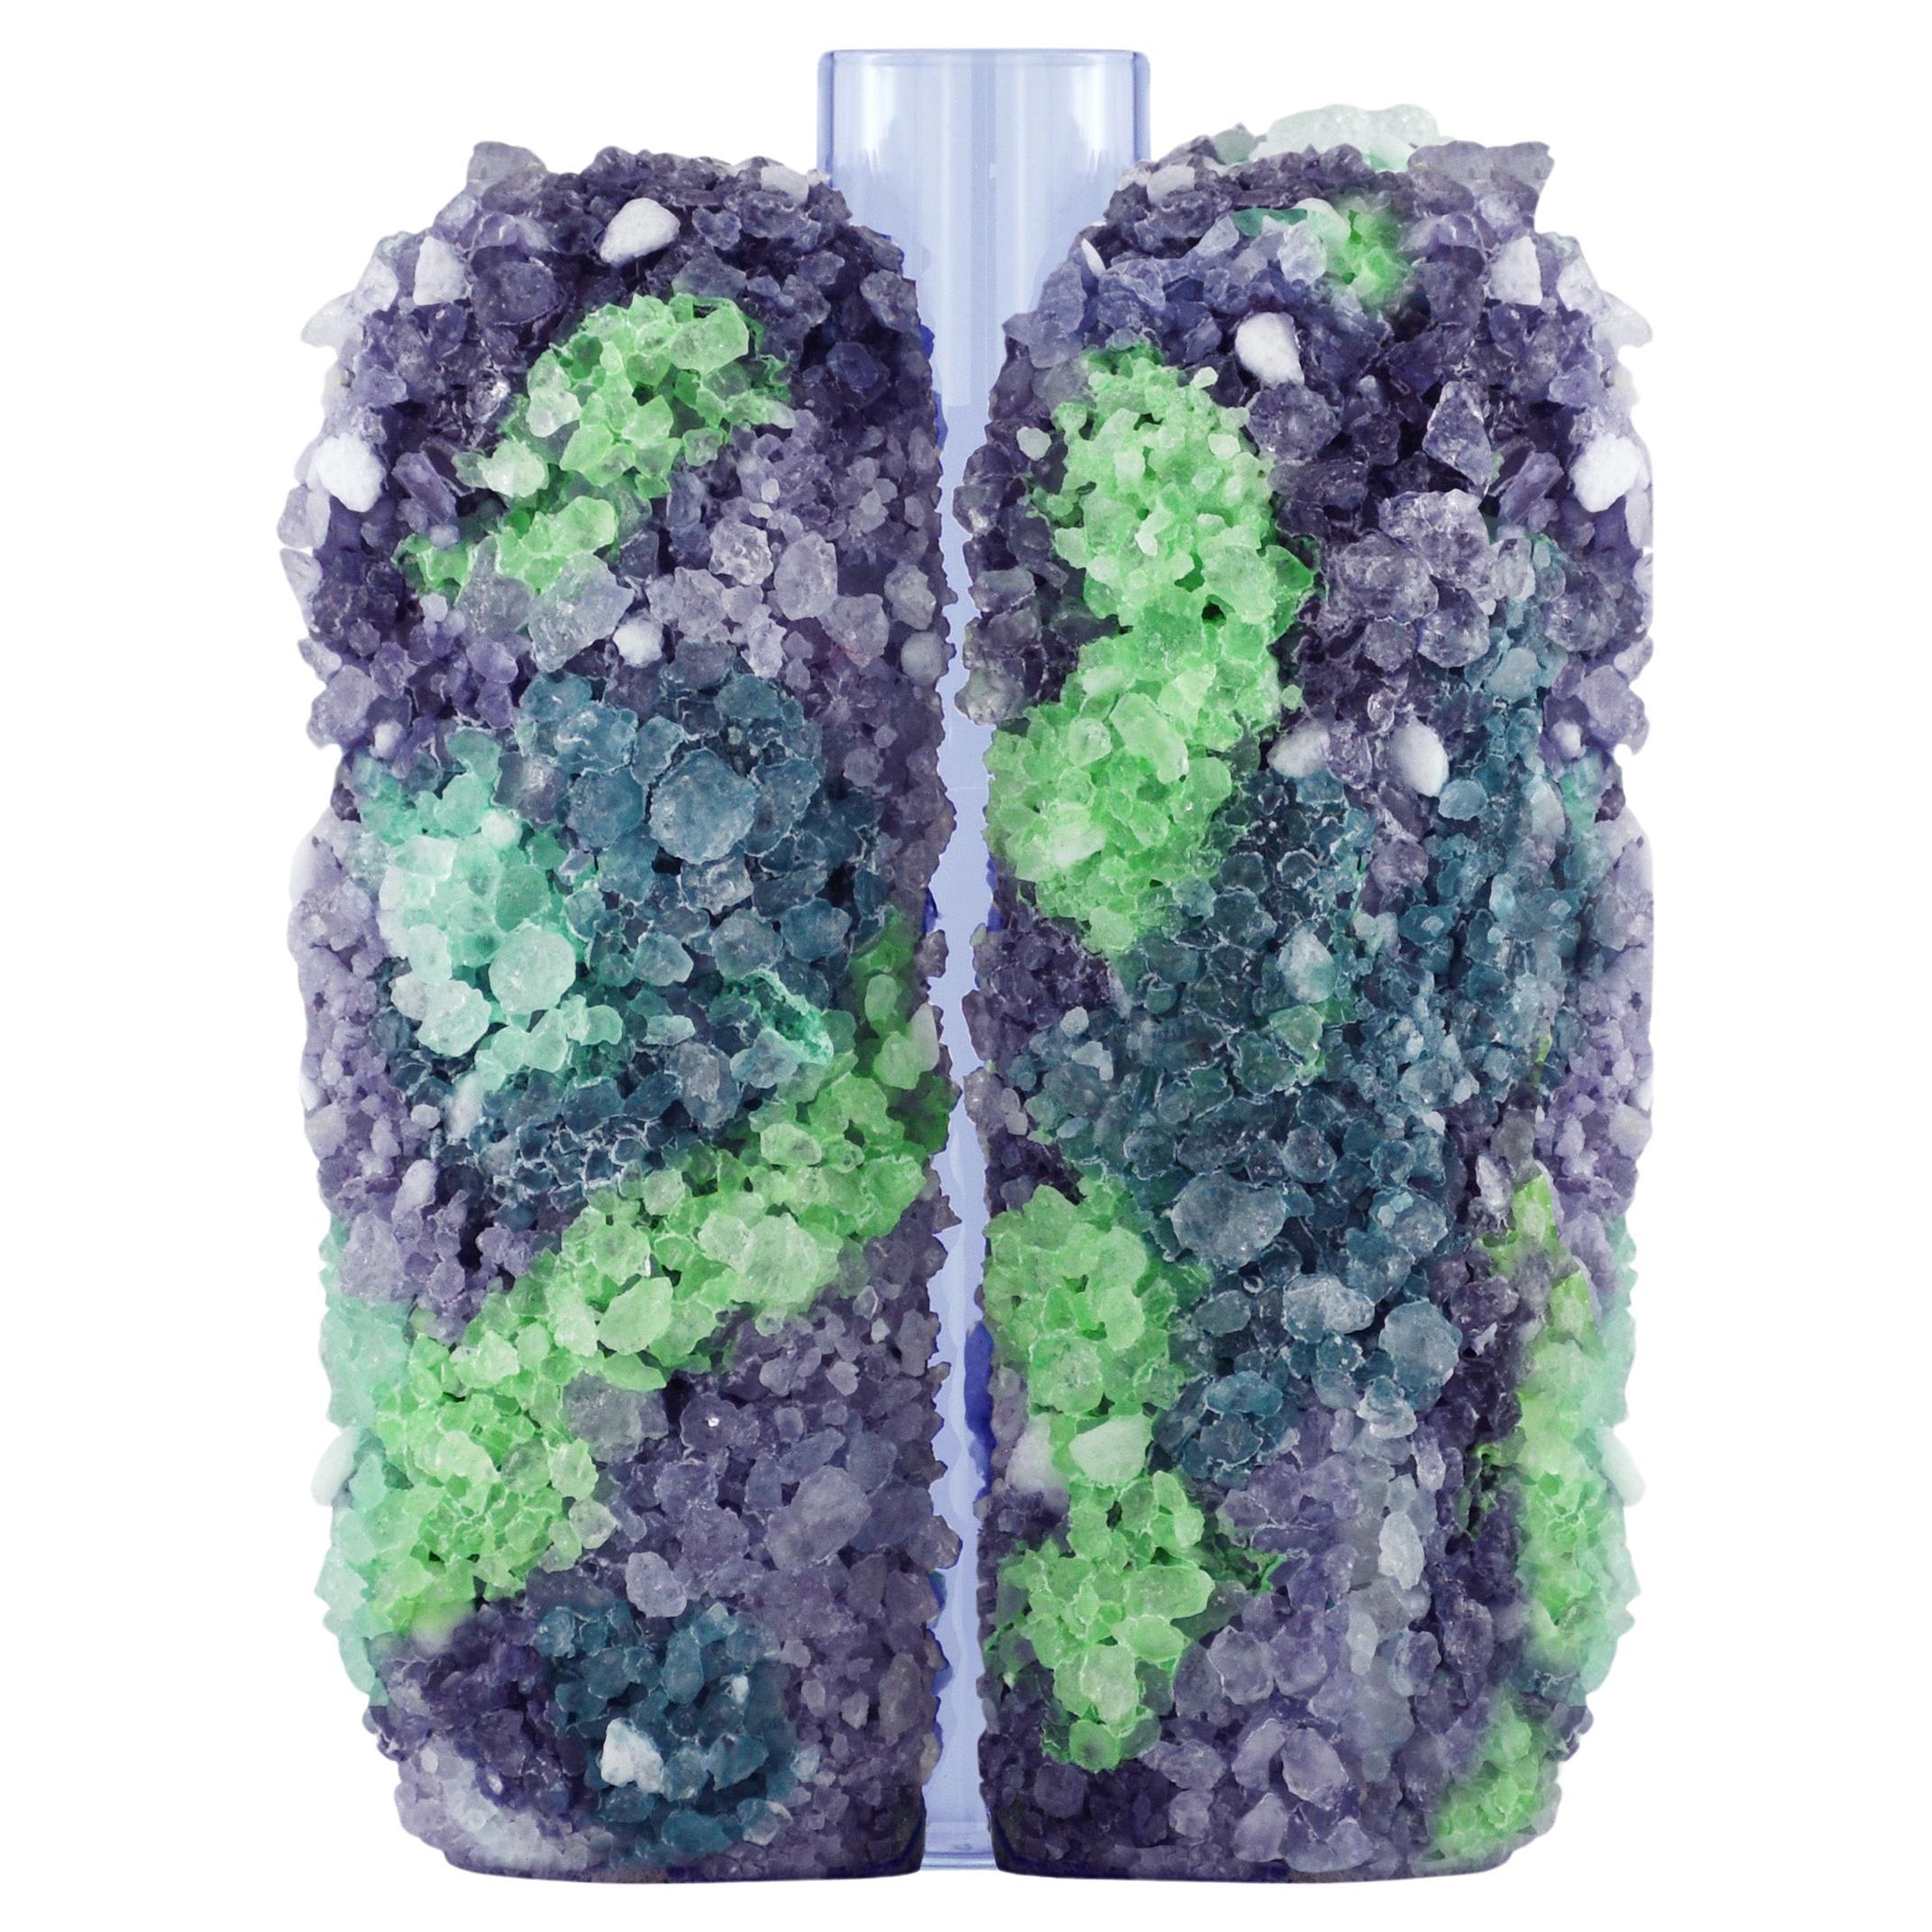 Violet & Green Glass and Stone with rock crystals Vase by COKI For Sale